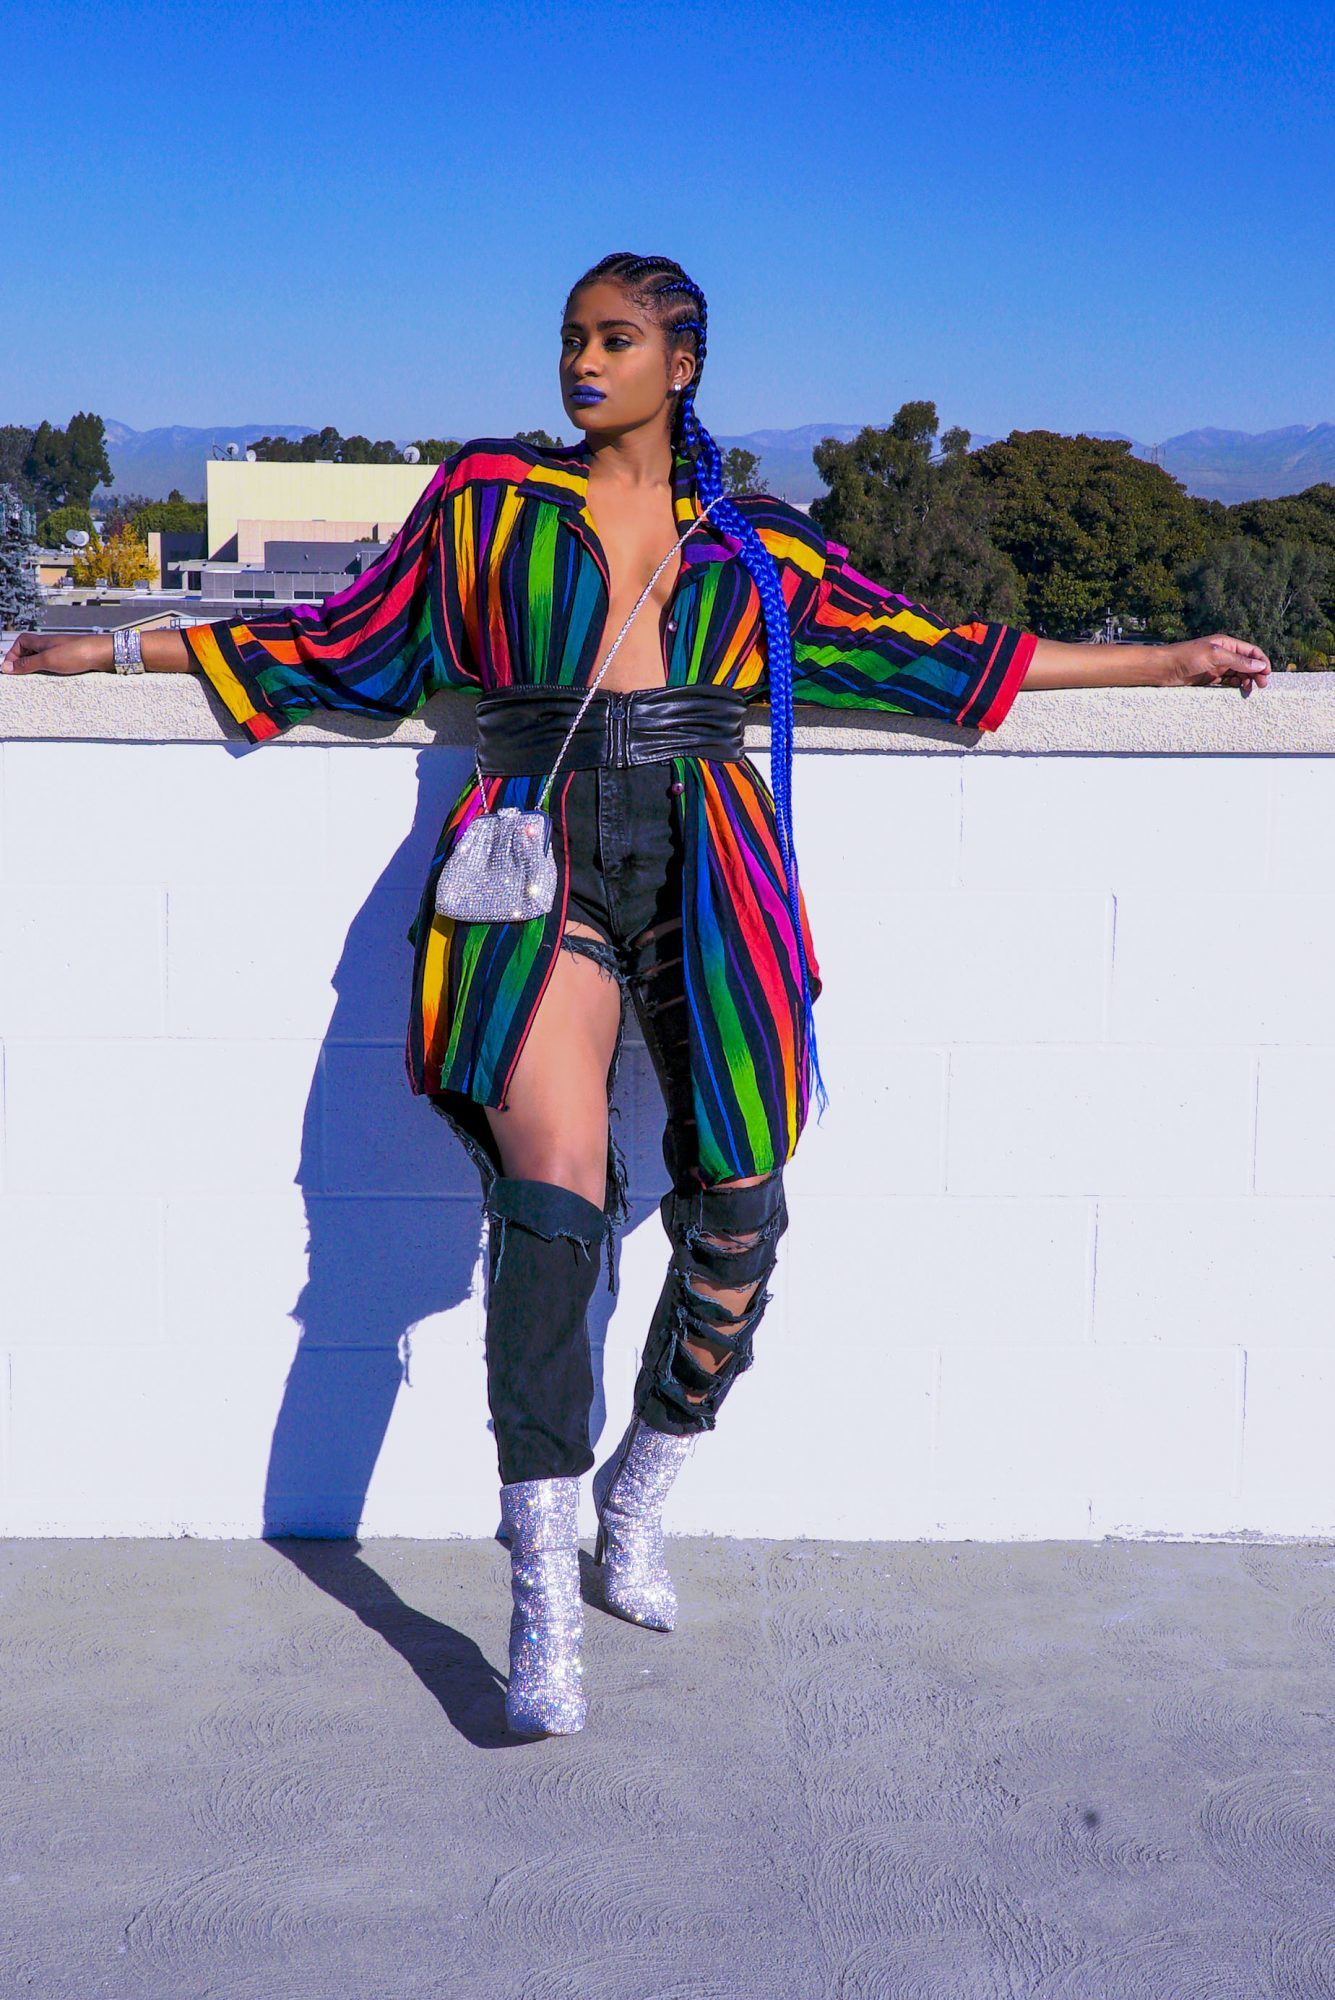 Meet Kinigra Deon of House of Aparaa and Styled by Kinigra in Downtown LA.